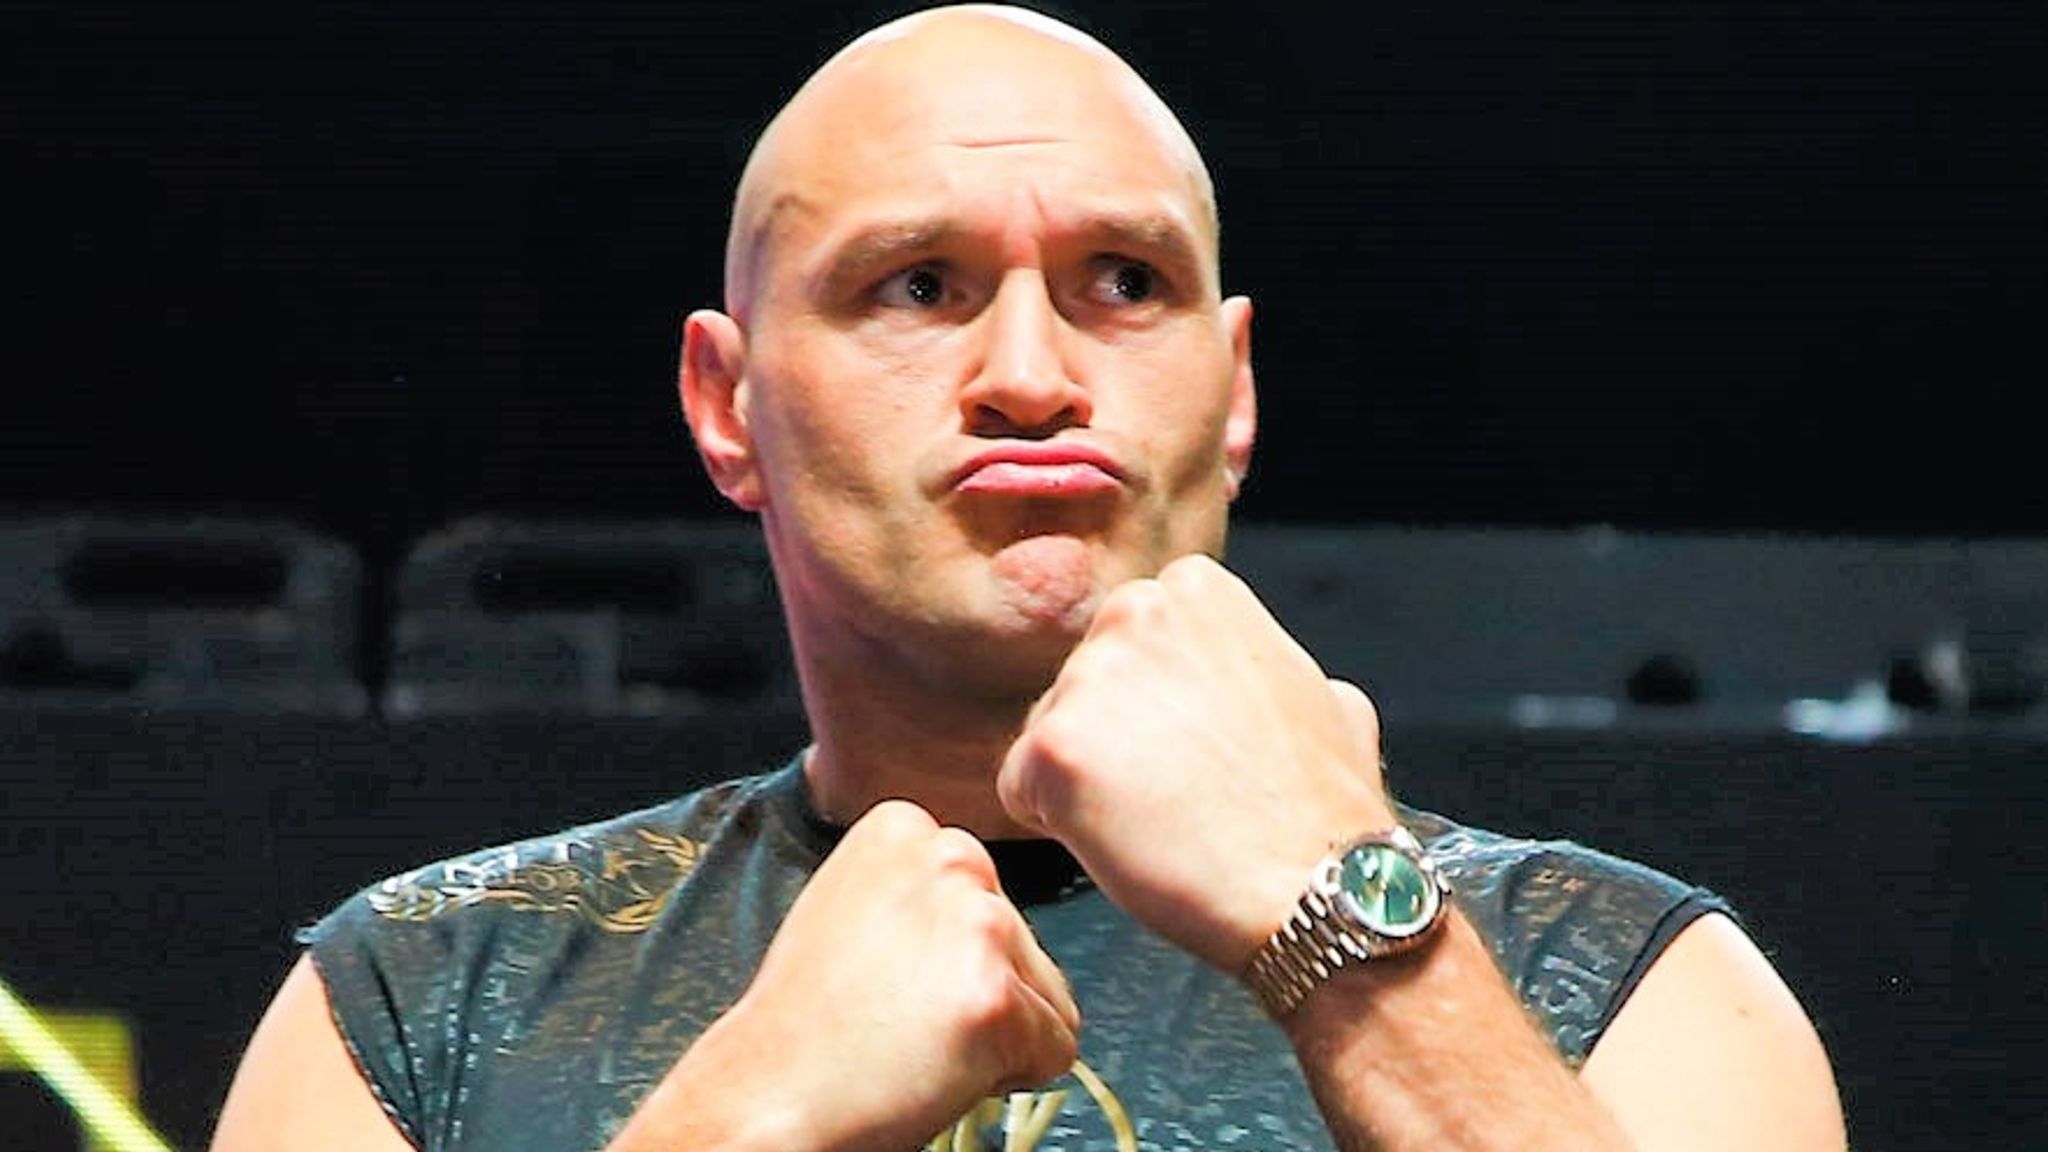 Tyson Fury and Dillian Whytes negotiation to meet enters final hours before purse bids